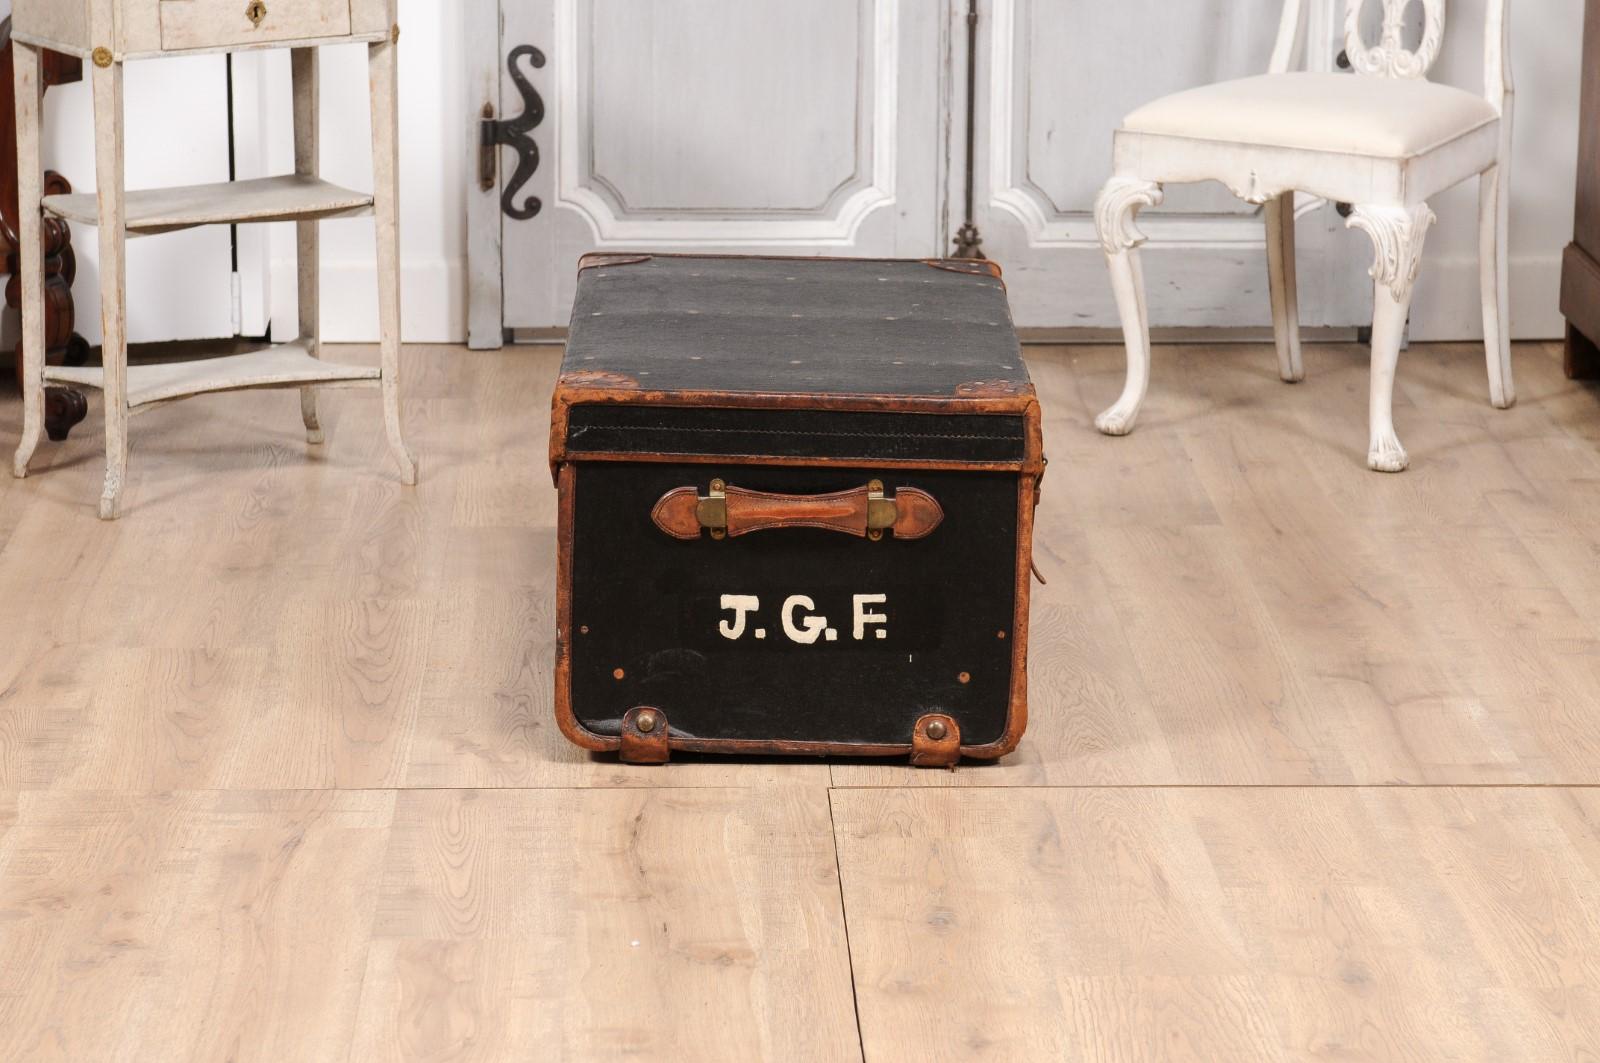 English Victorian Period 19th Century Black Traveling Trunk With Initials J.G.F. For Sale 4